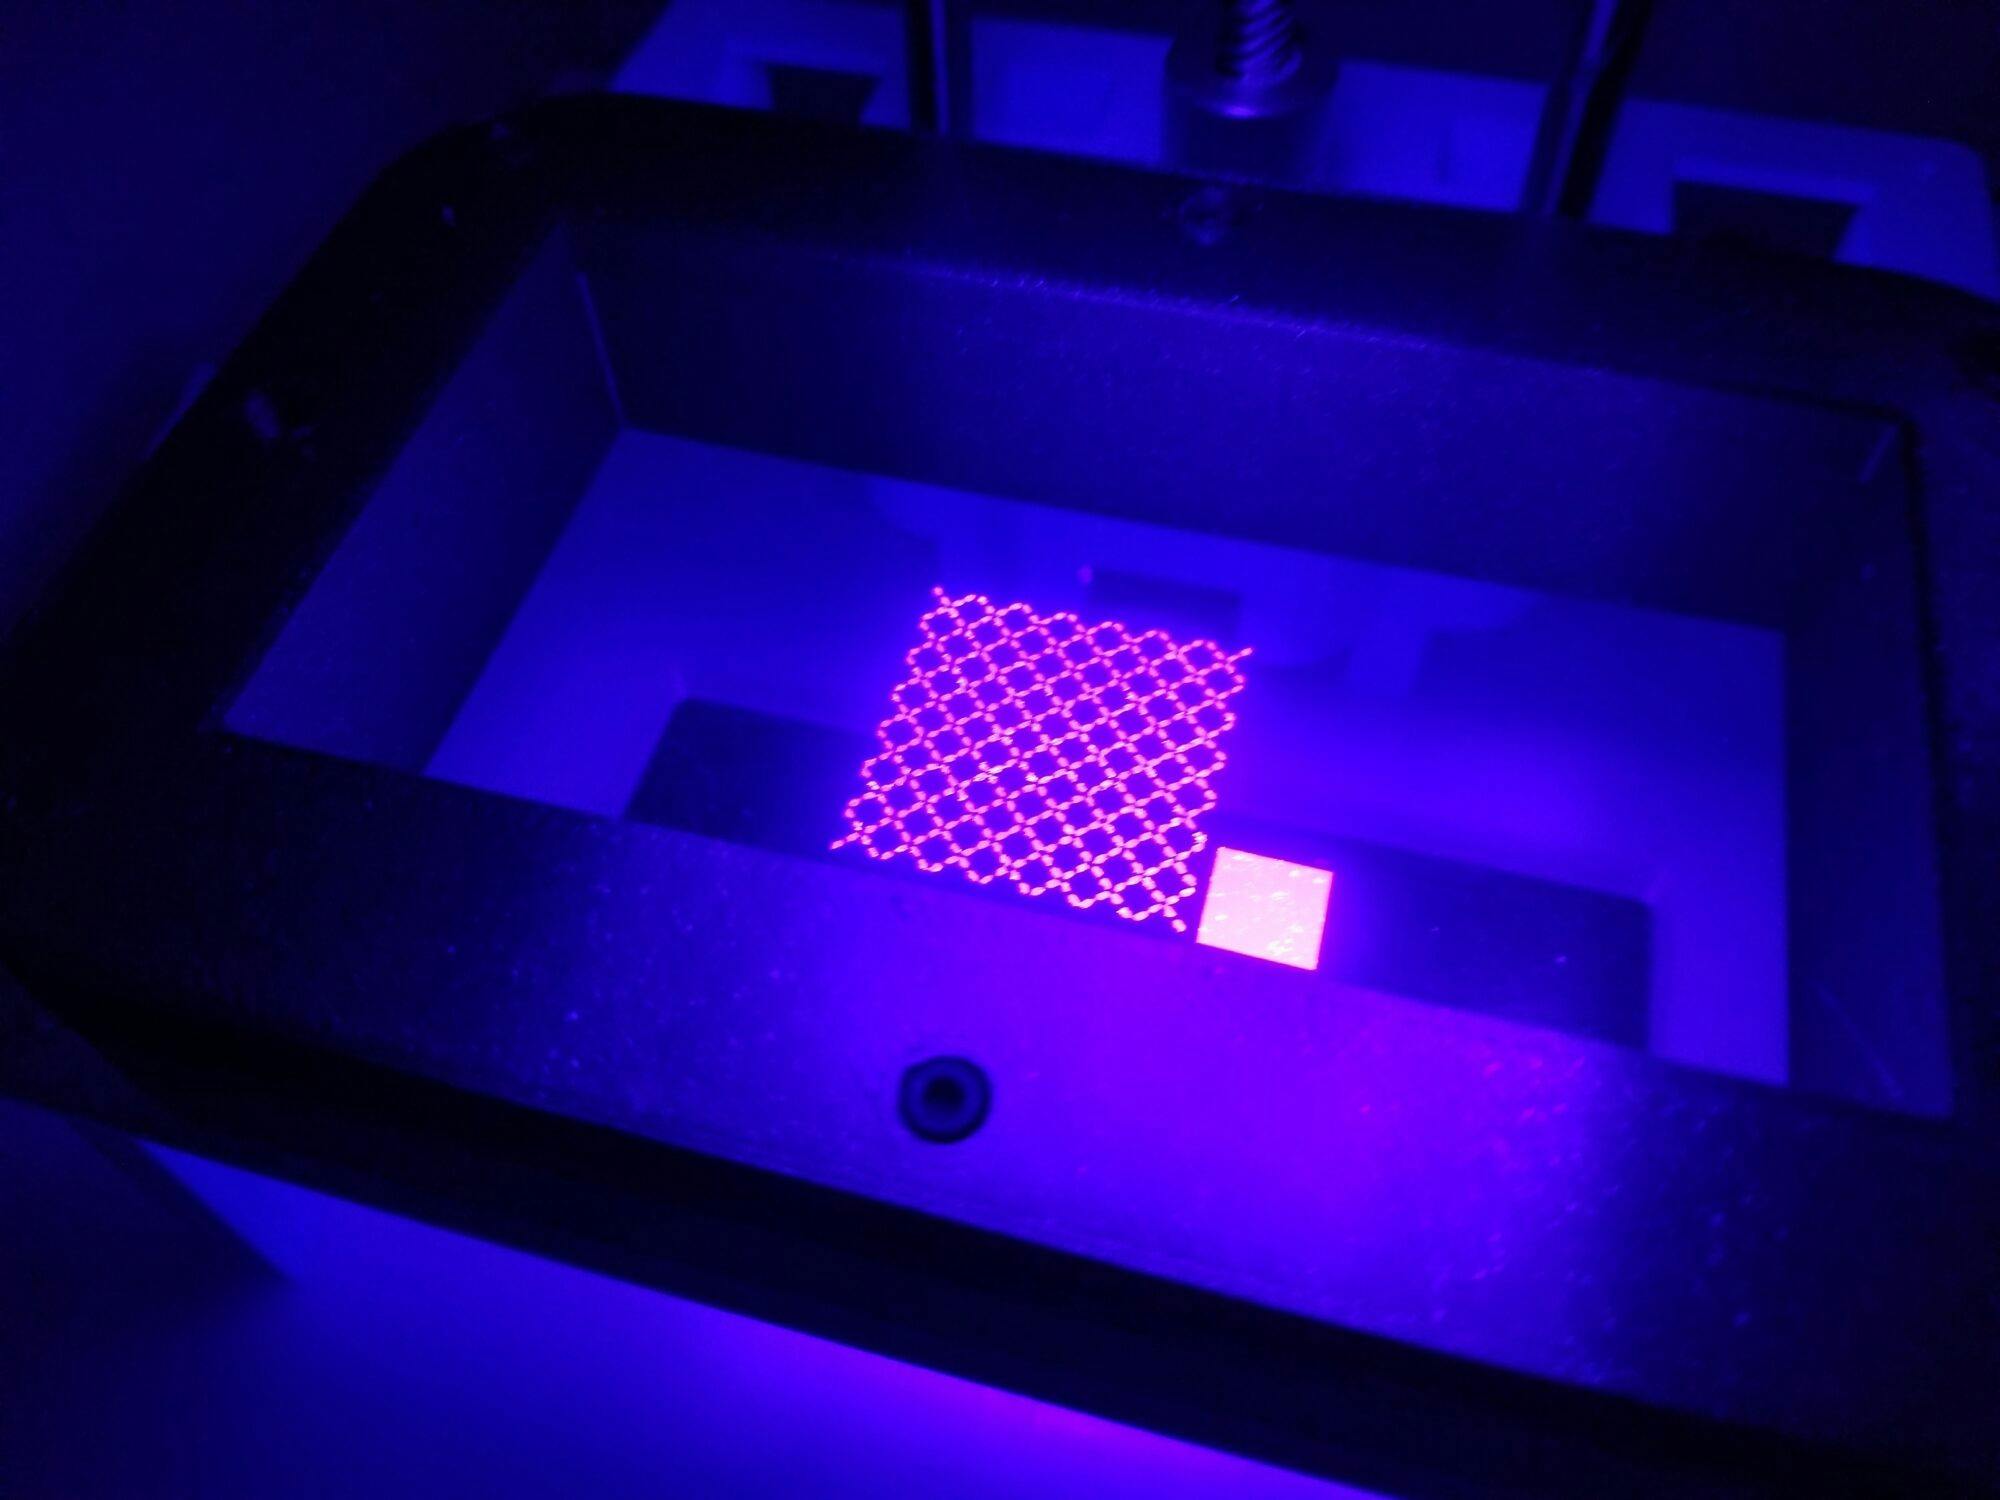 Researchers at the Kaplan Lab have developed a proof-of-concept DLP bioprinter based on In-Vision UV DLP projector, Ikarus.